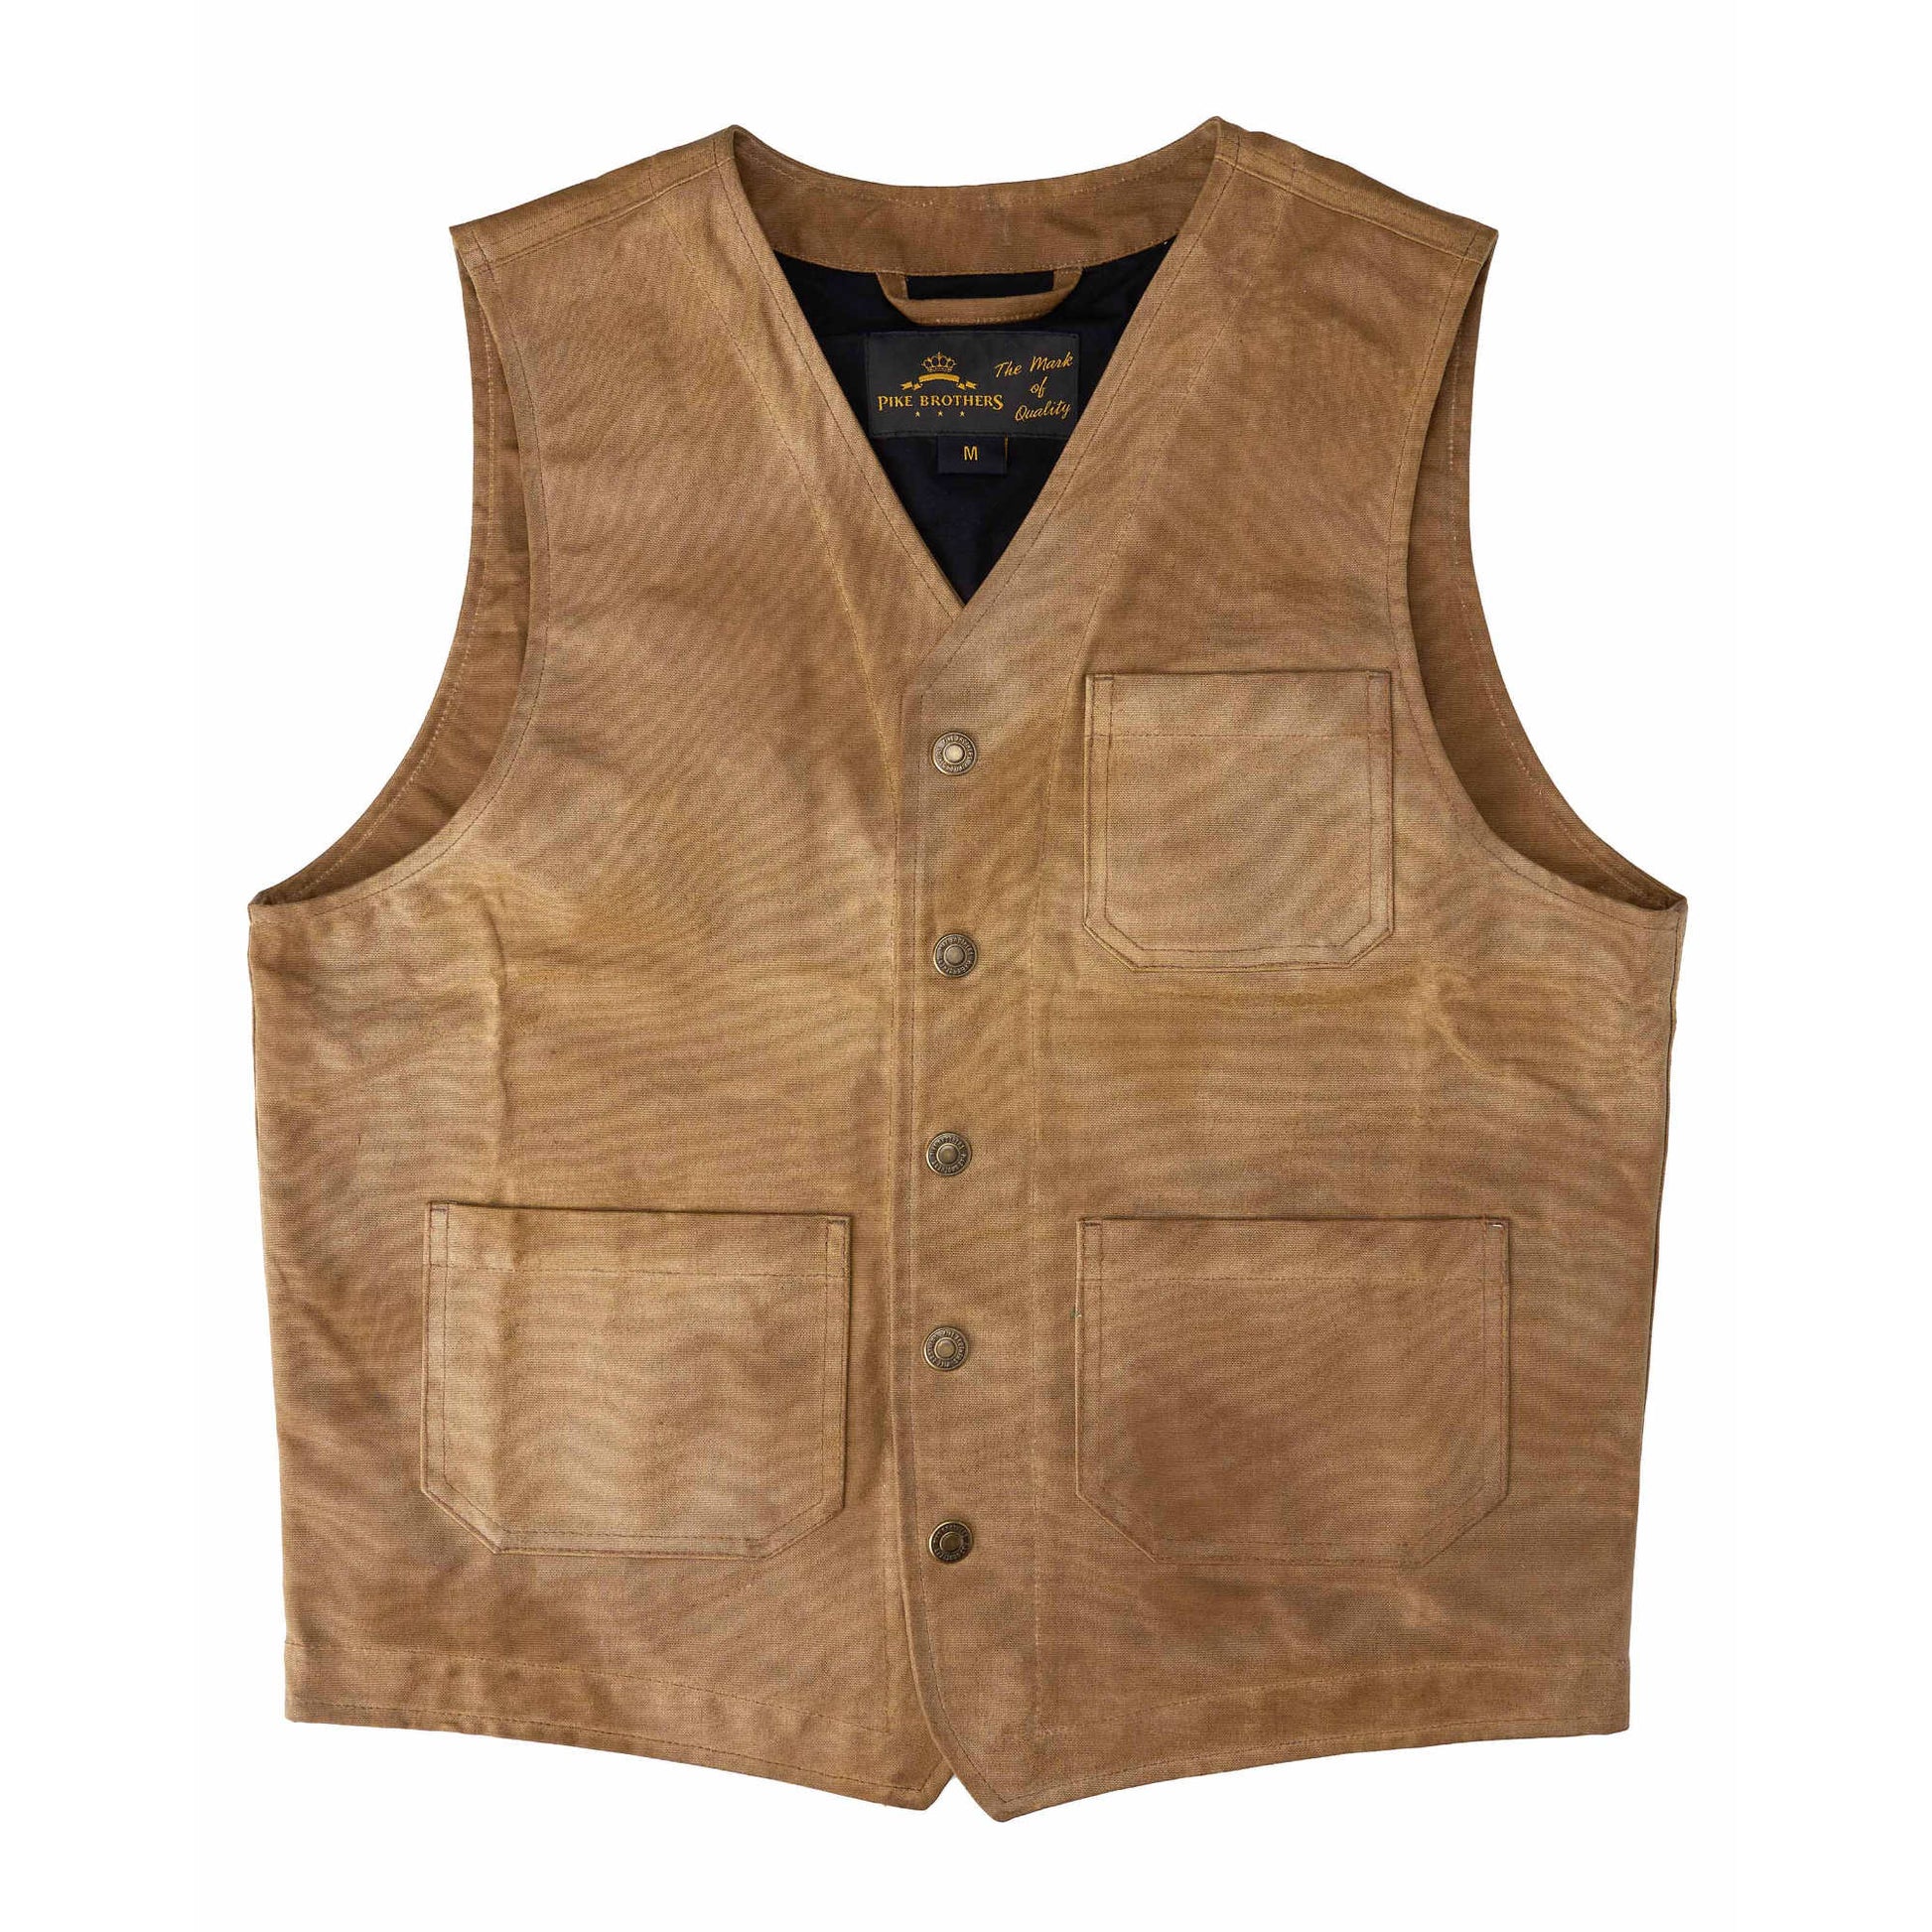 Pike Brothers 1937 Roamer Vest Cotton Waxed - Tan